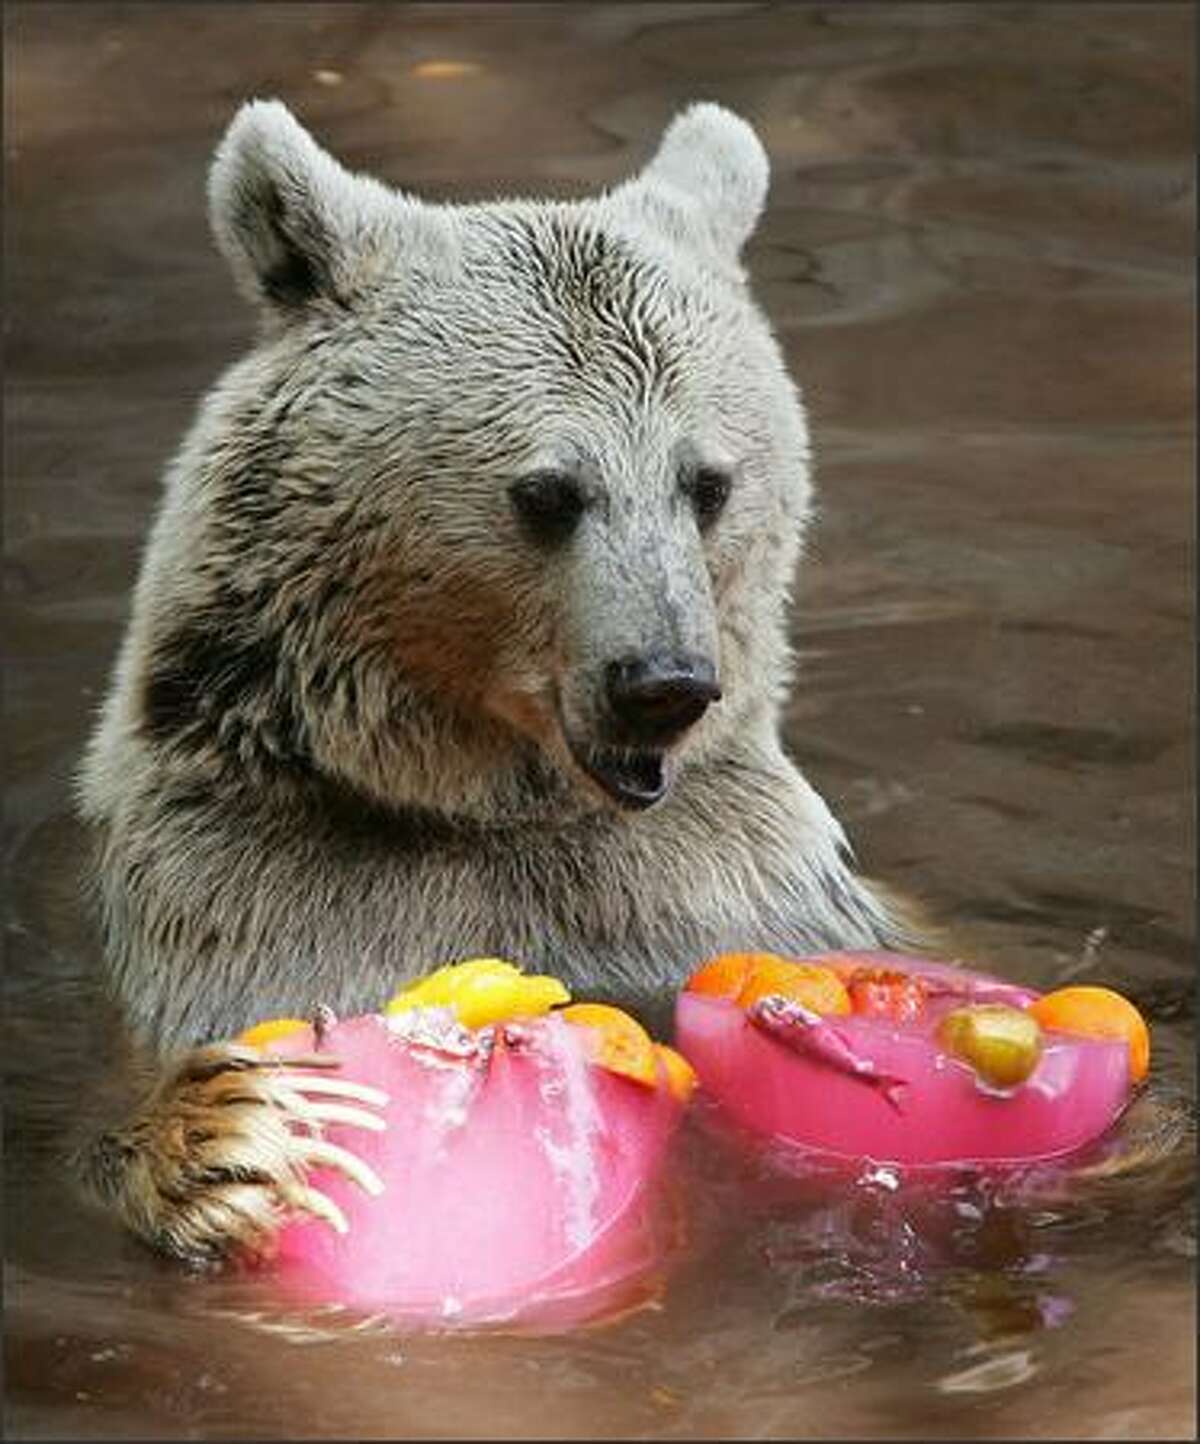 A bear is seen eating two blocks of flavoured ice at the Israeli zoo of Ramat Gan, north of Tel Aviv, as temperatures reached 34 degrees Celsius on Wednesday.